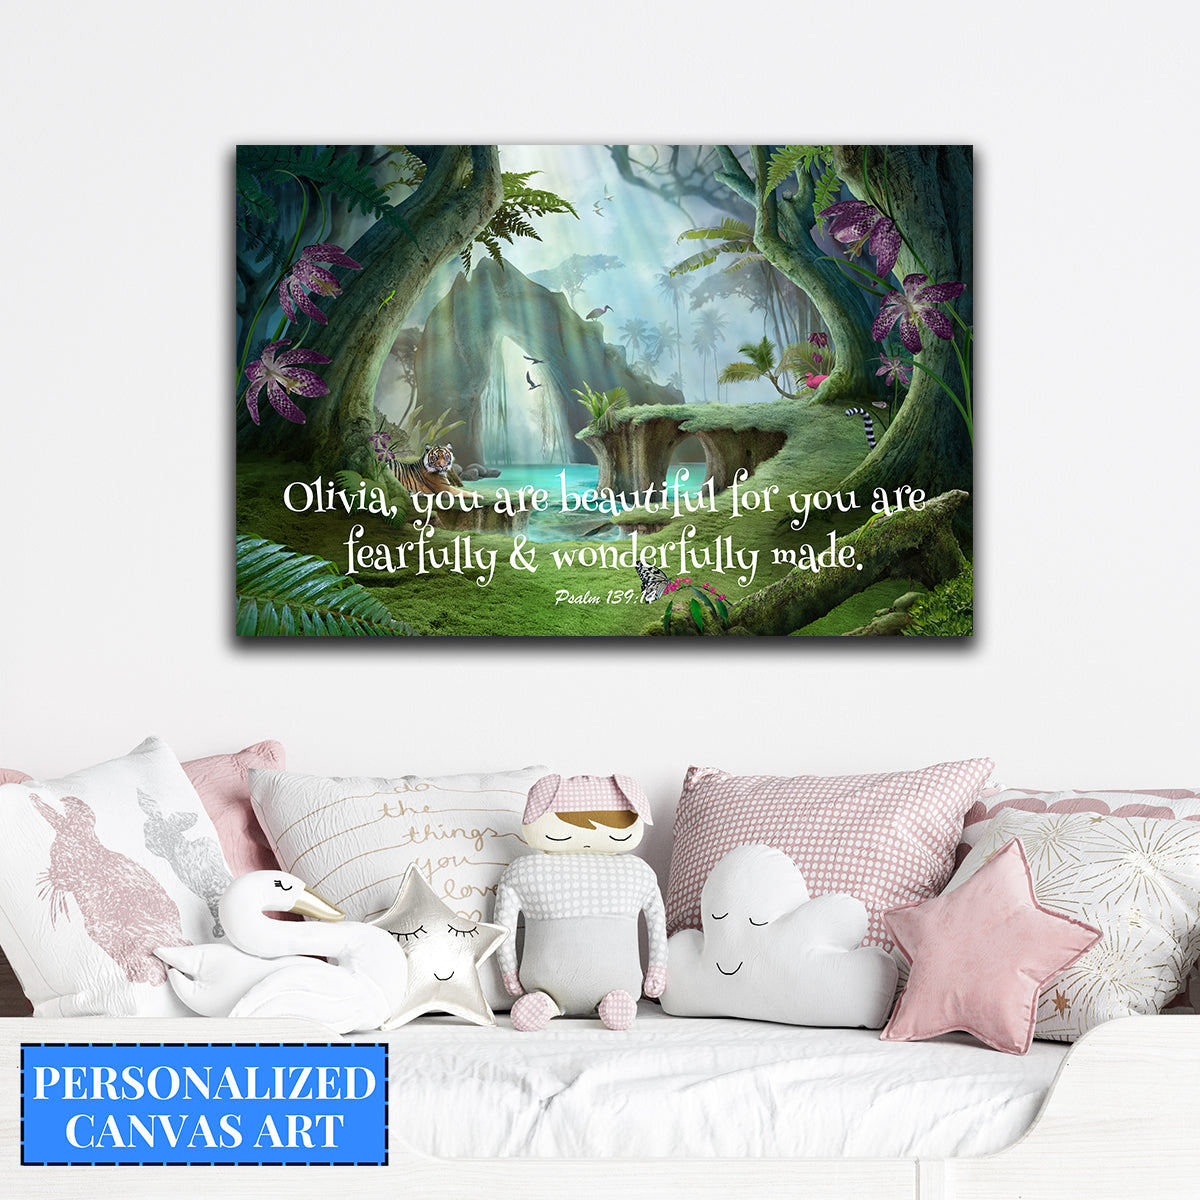 You Are Beautiful & Wonderfully Made Personalized Premium Kids Canvas